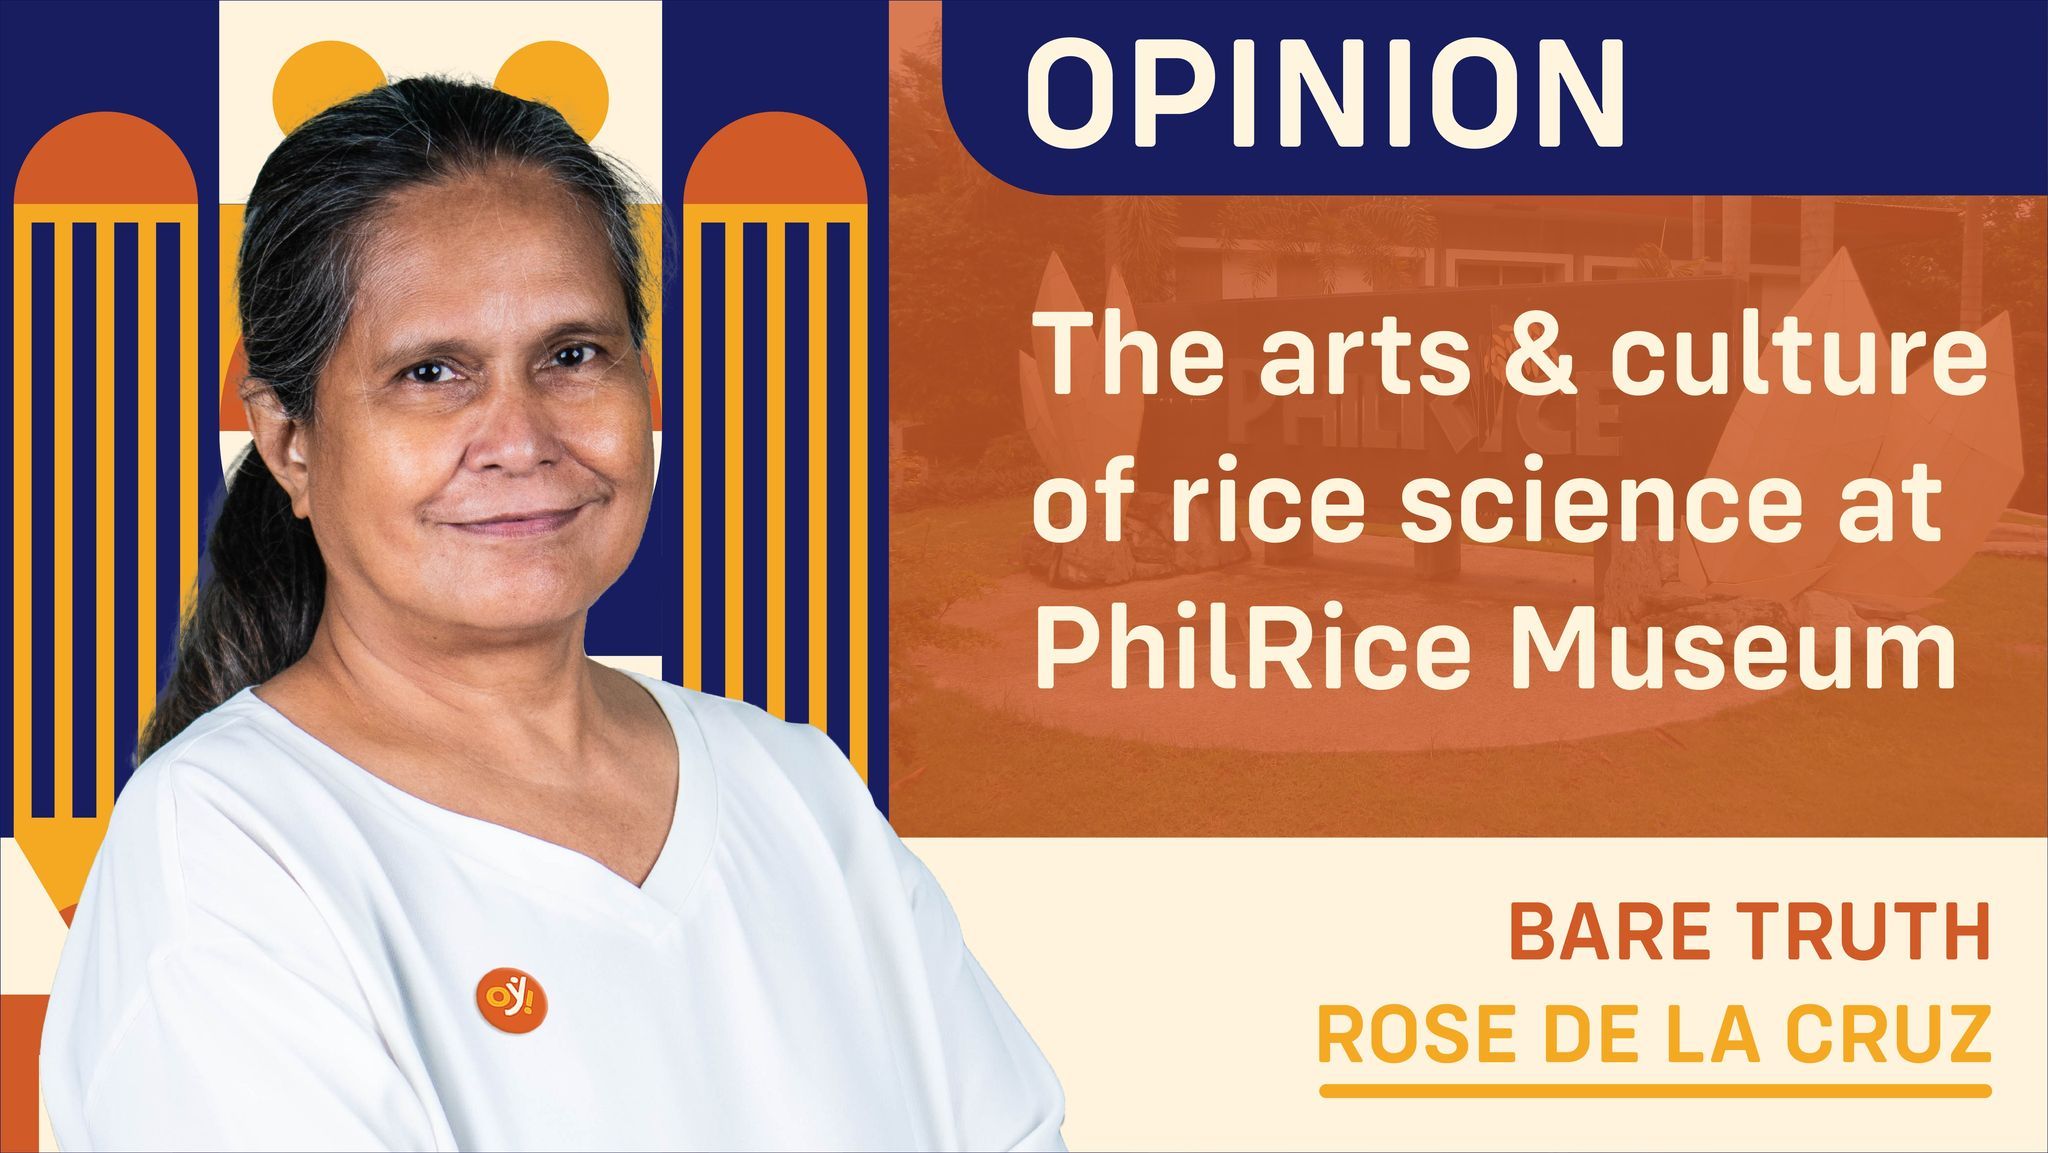 The arts & culture of rice science at PhilRice Museum